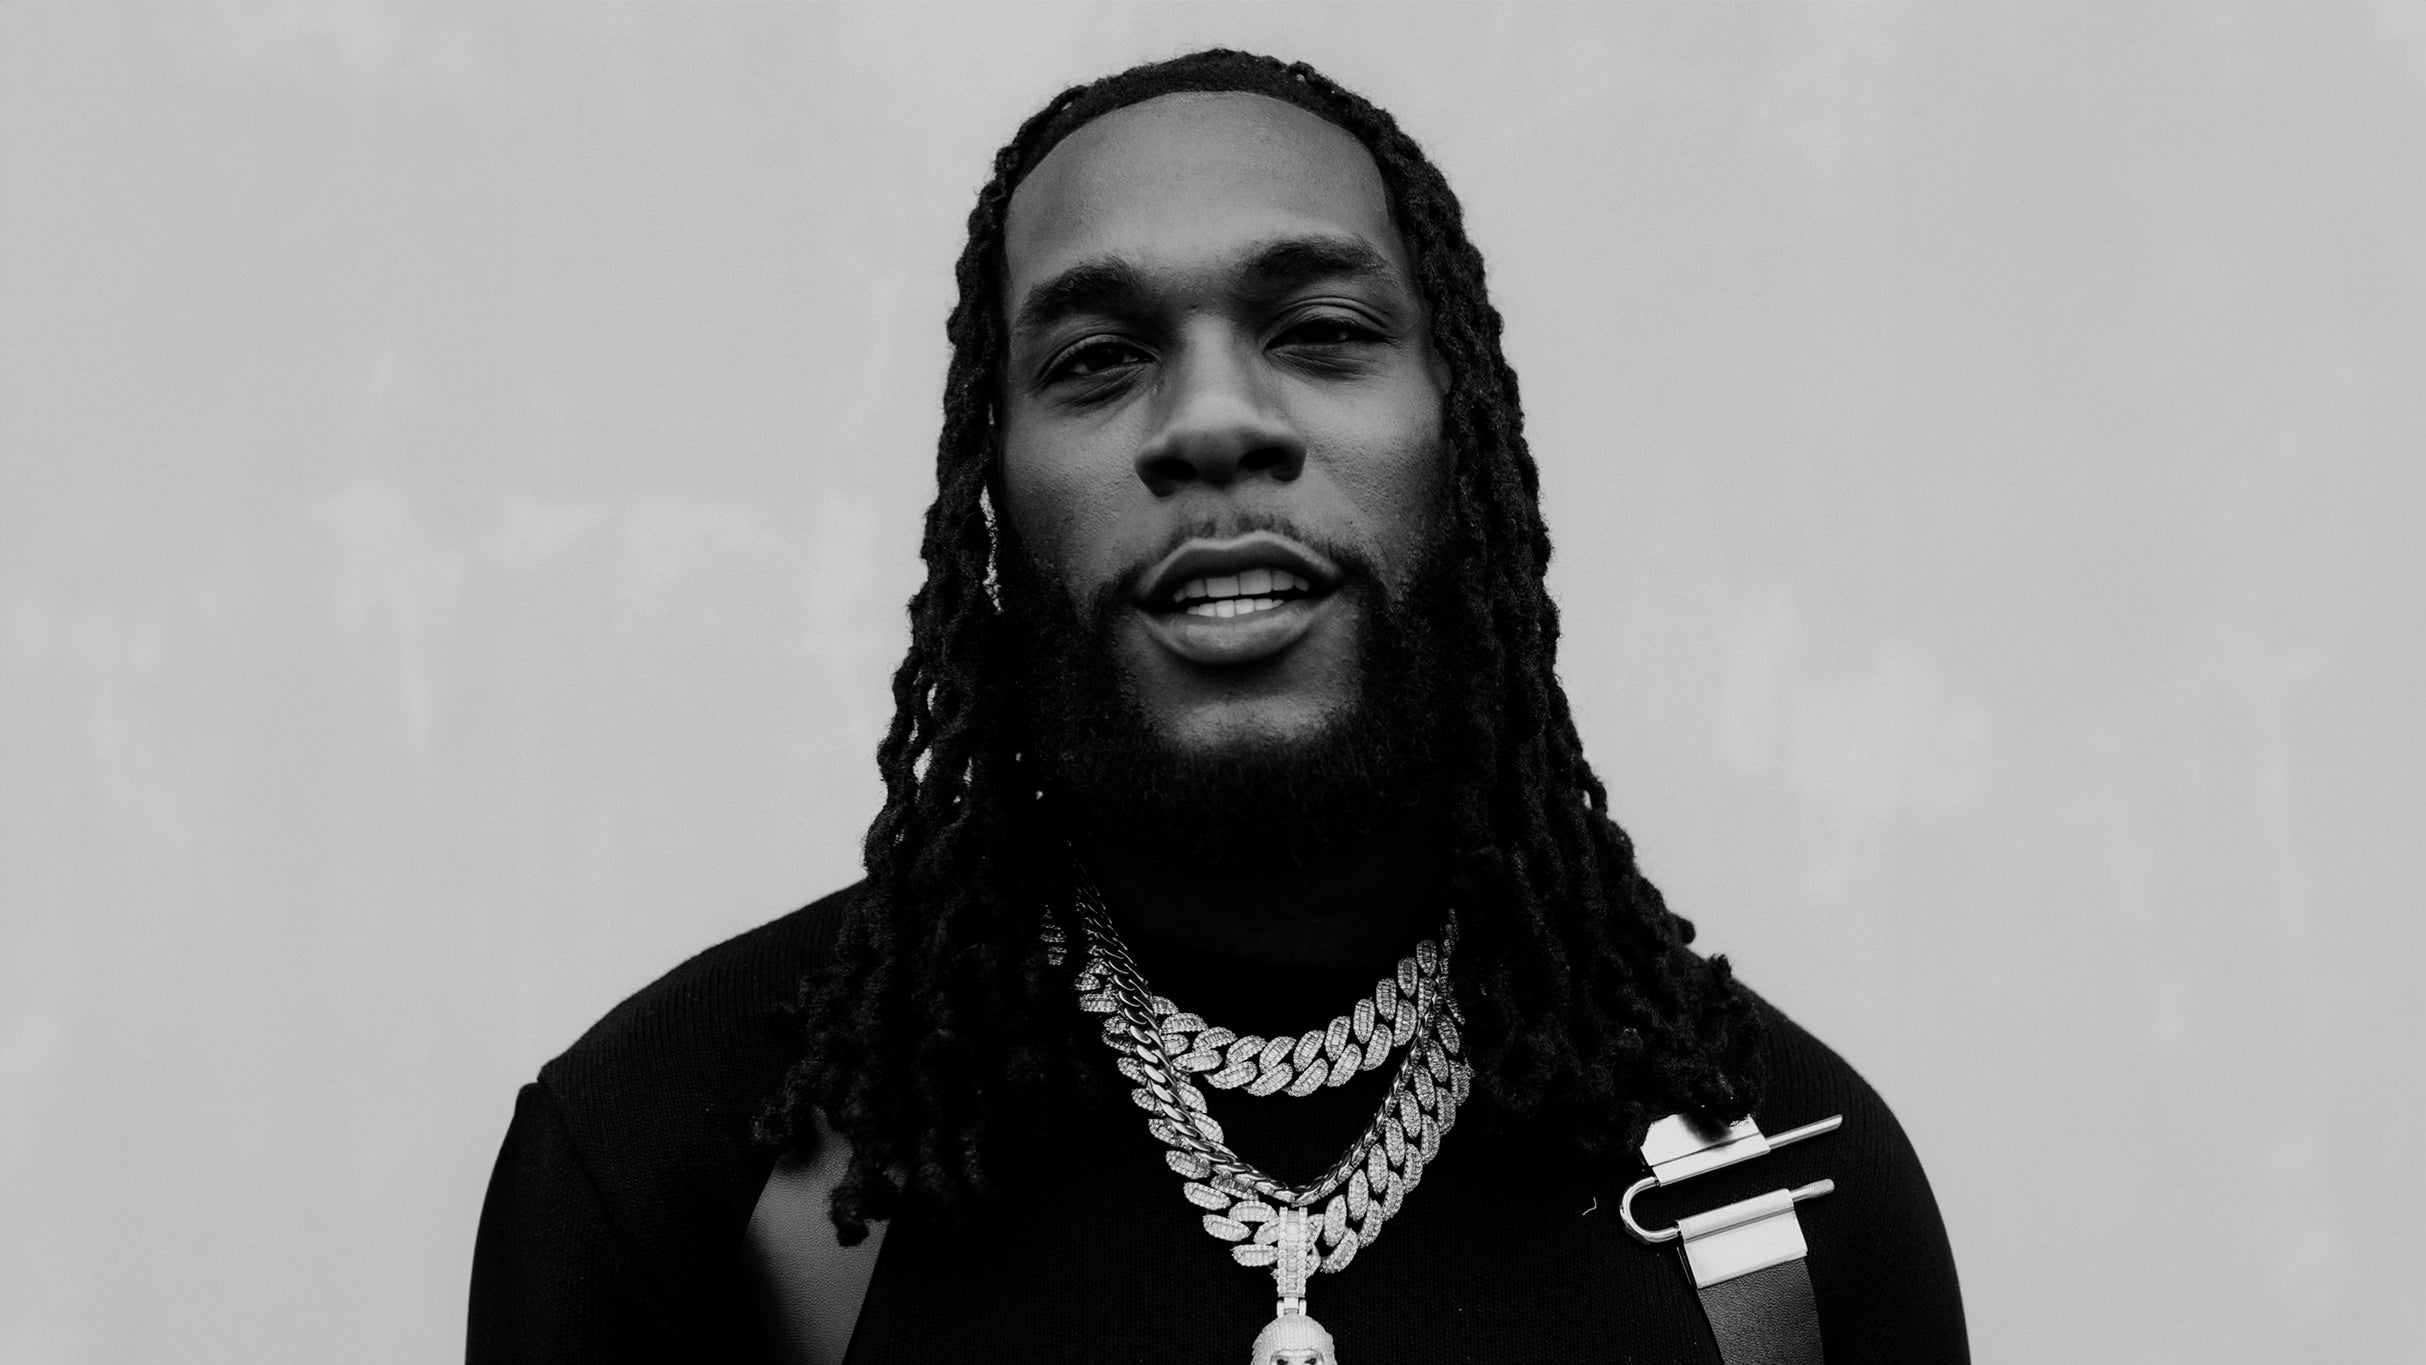 Burna Boy: I Told Them Tour free pre-sale code for show tickets in Tampa, FL (Amalie Arena)